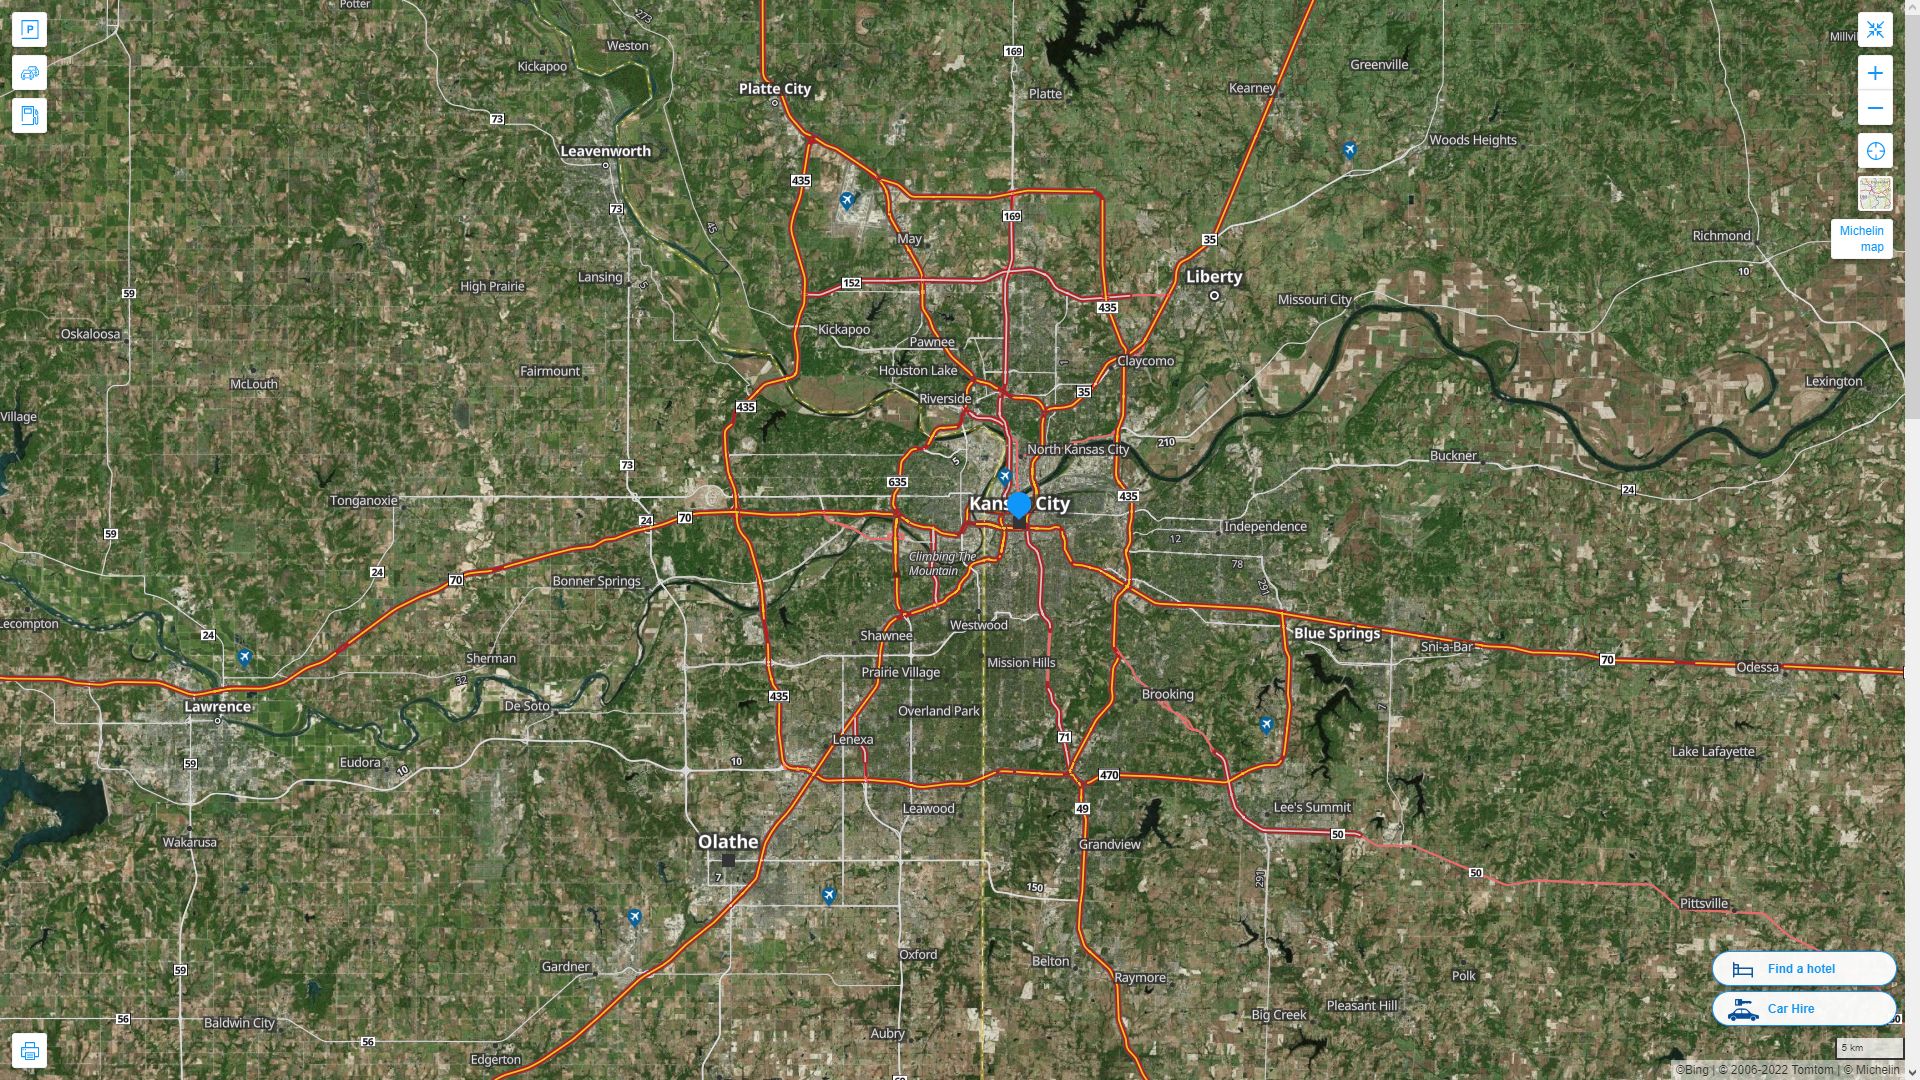 Kansas City Missouri Highway and Road Map with Satellite View